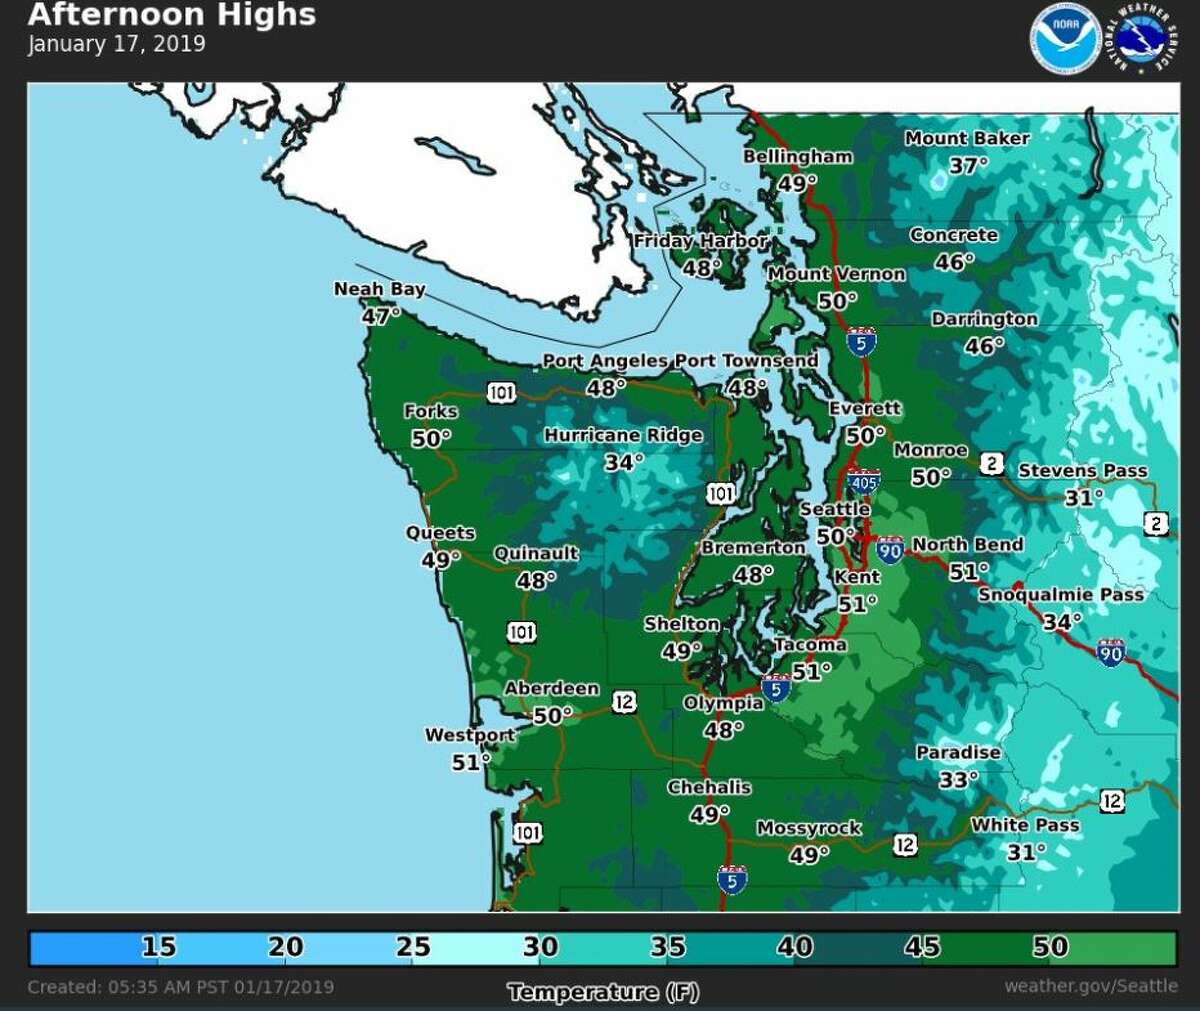 Afternoon high temperatures for Seattle on Thursday were expected to reach 50 degrees.